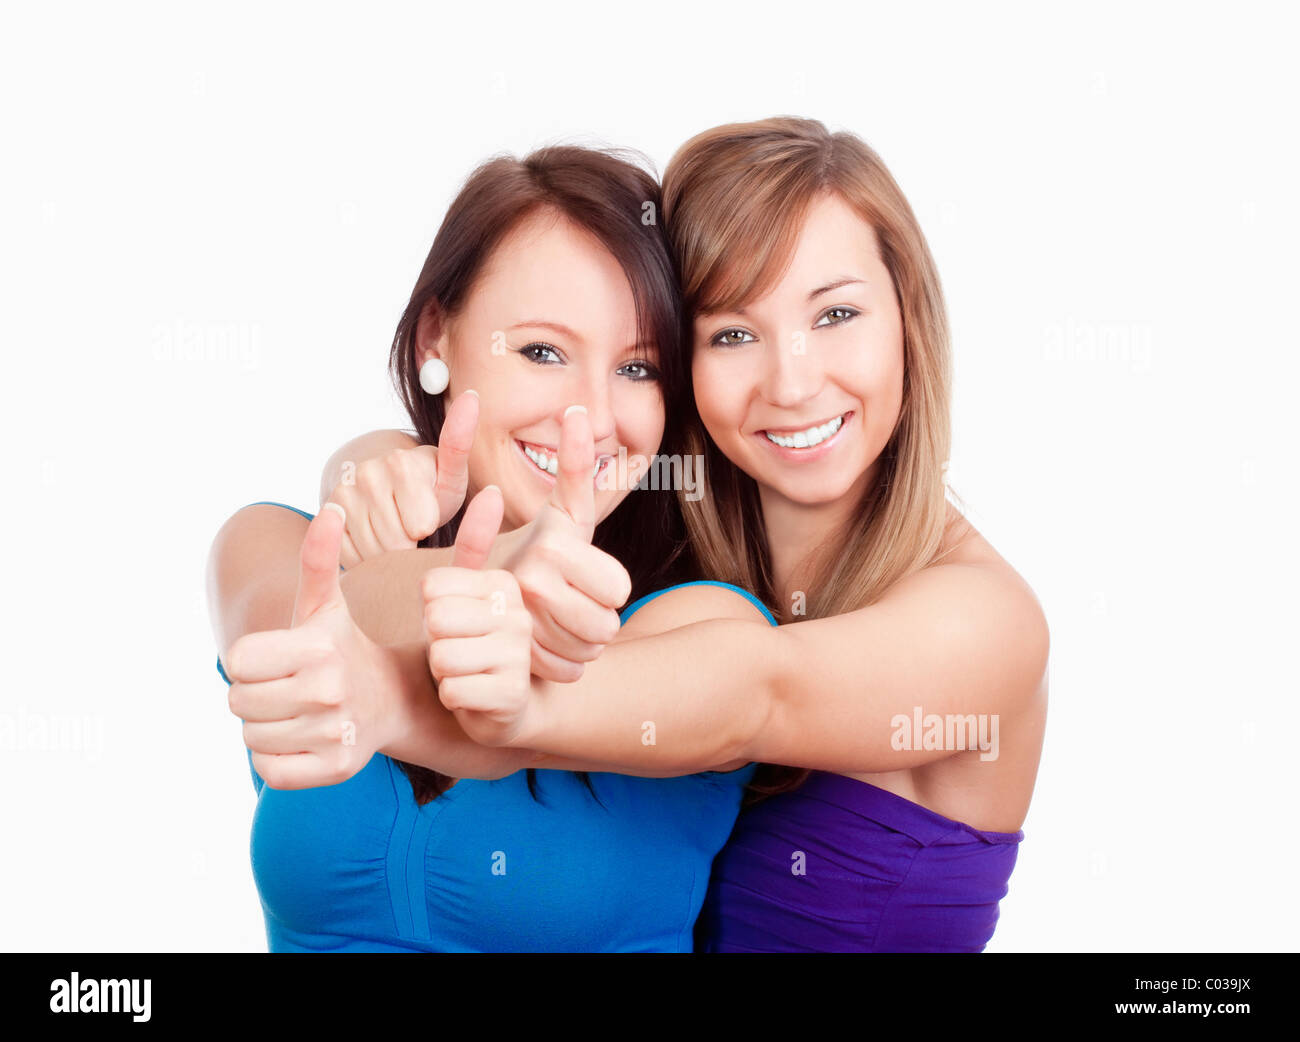 two young women showing thumbs up, smiling - isolated on white Stock Photo